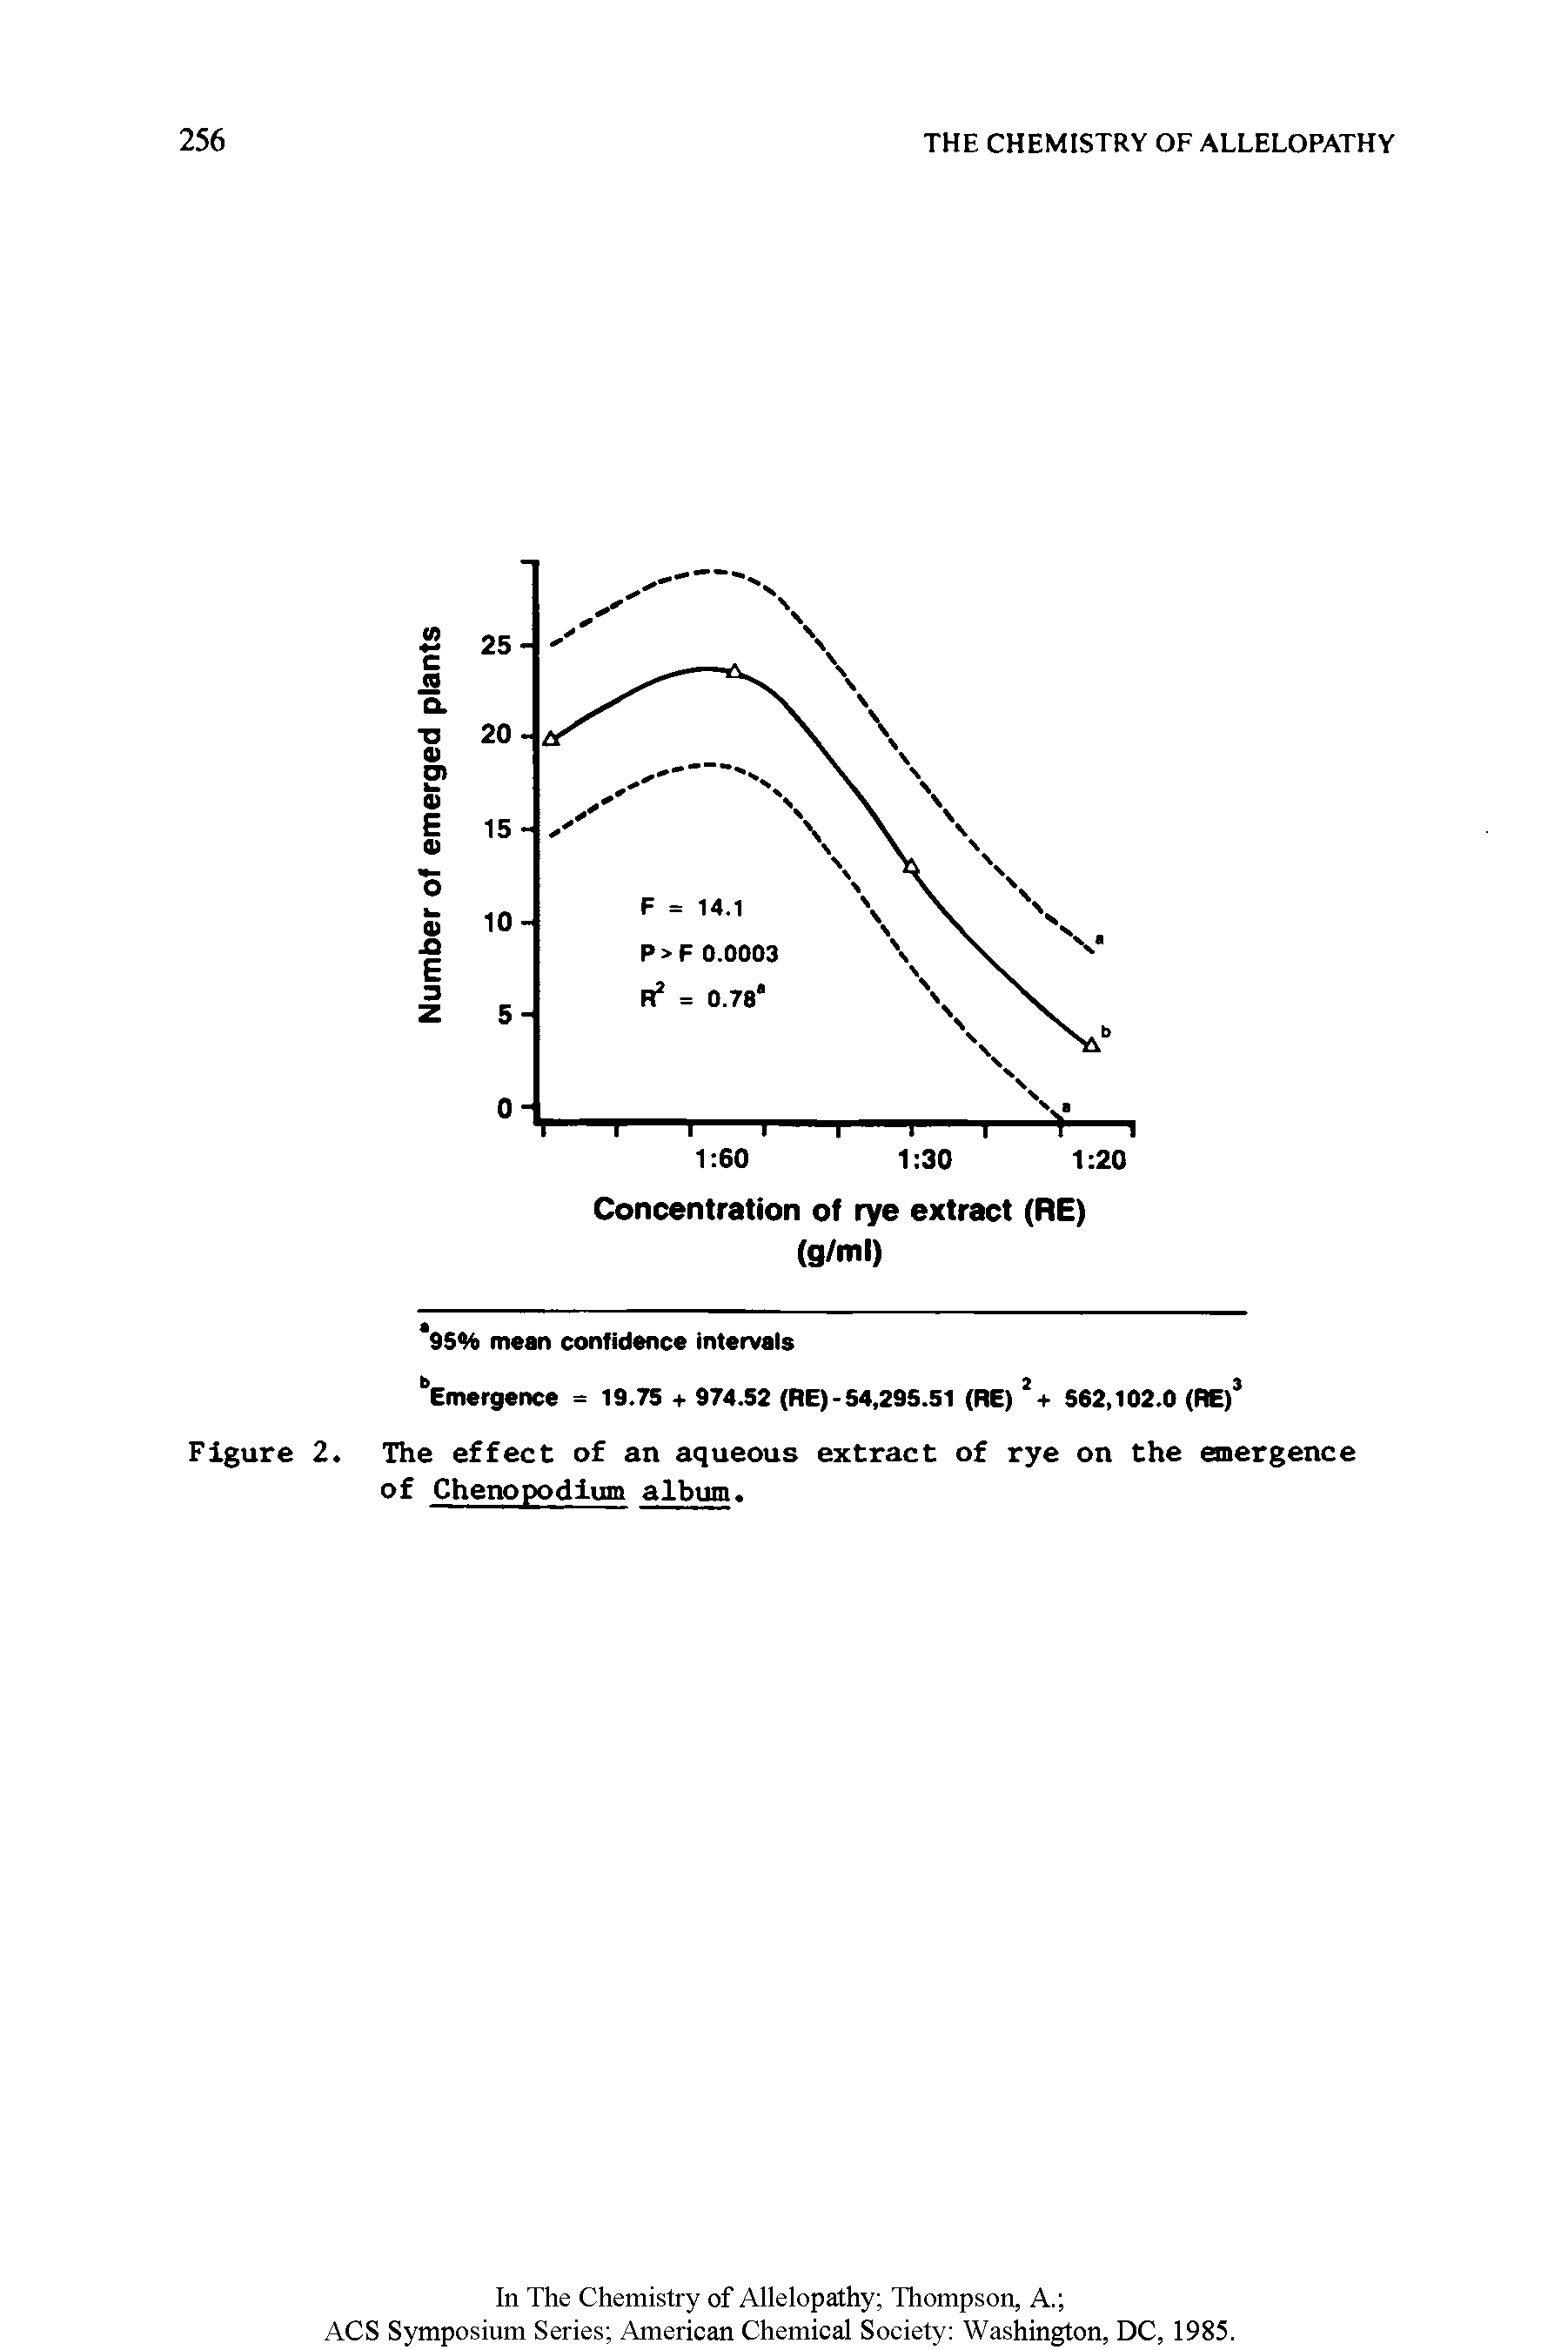 Figure 2. The effect of an aqueous extract of rye on the emergence of Chenopodium album.